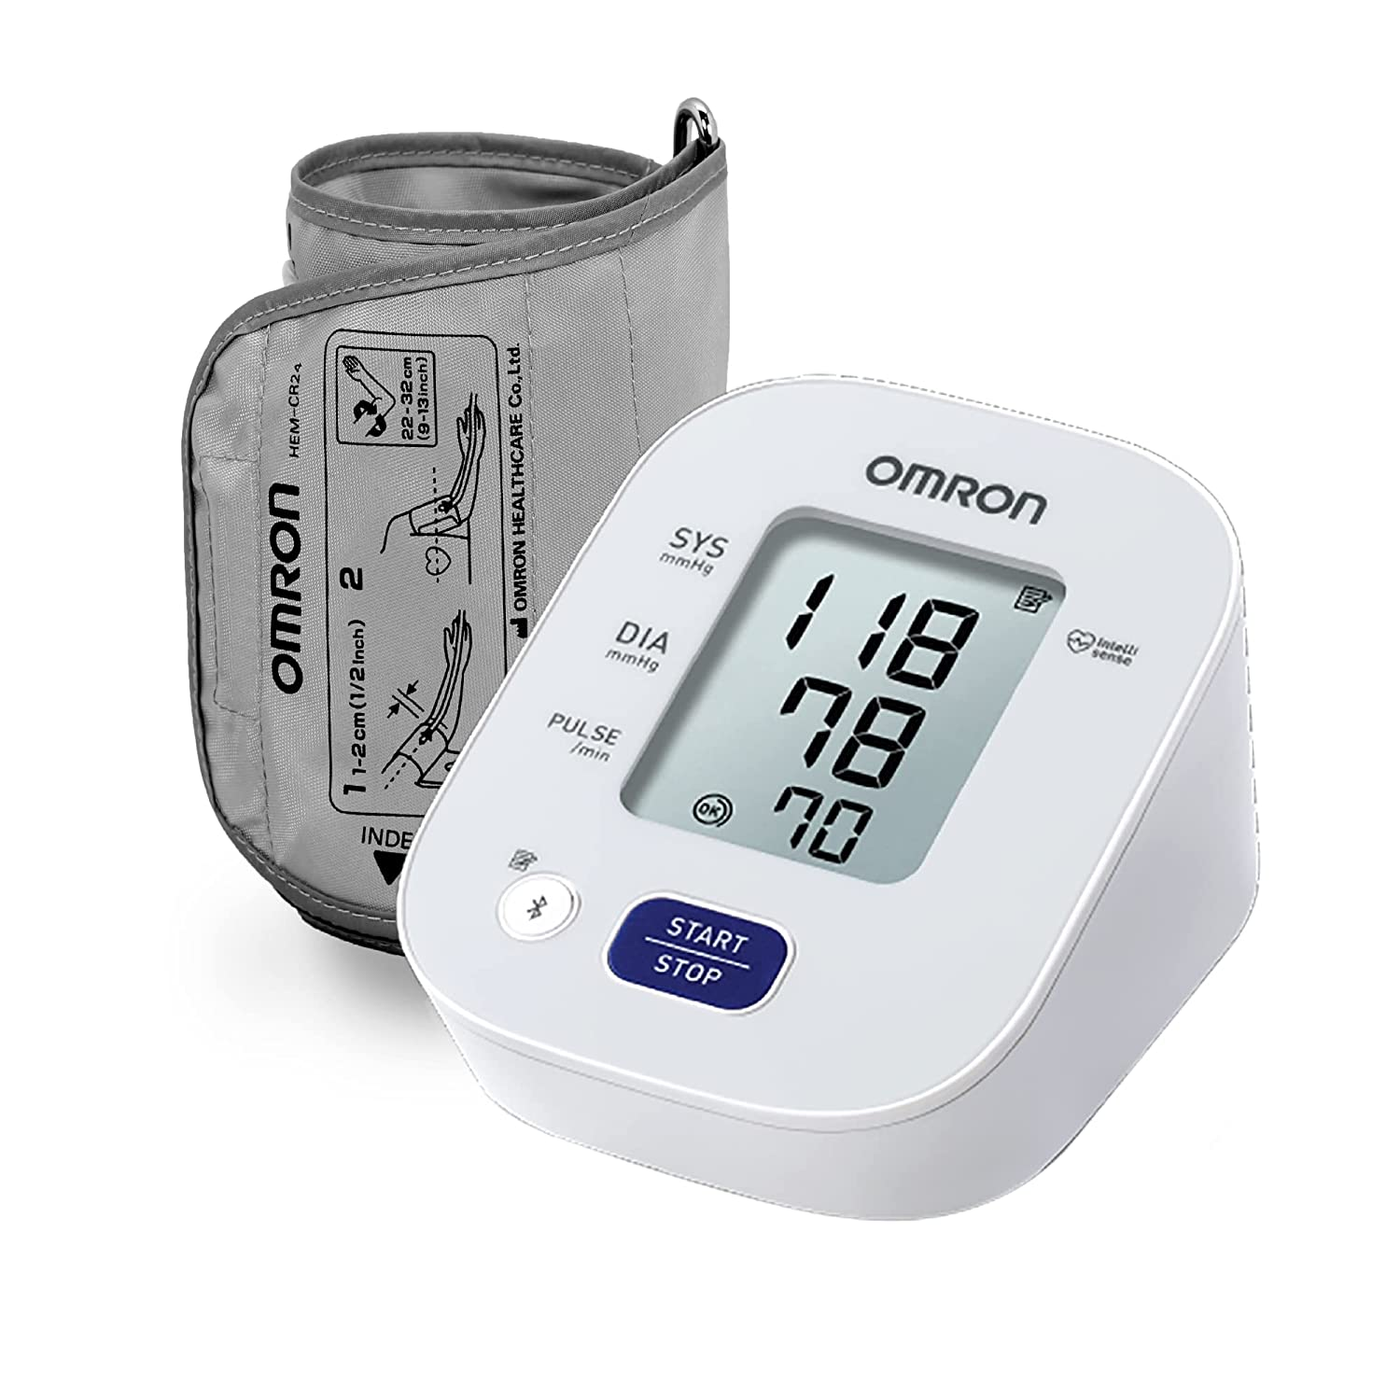 Omron BP (Blood Pressure) Monitor With Bluetooth Technology With Cuff Wrapping Guide HEM-7143T1 With Adapter